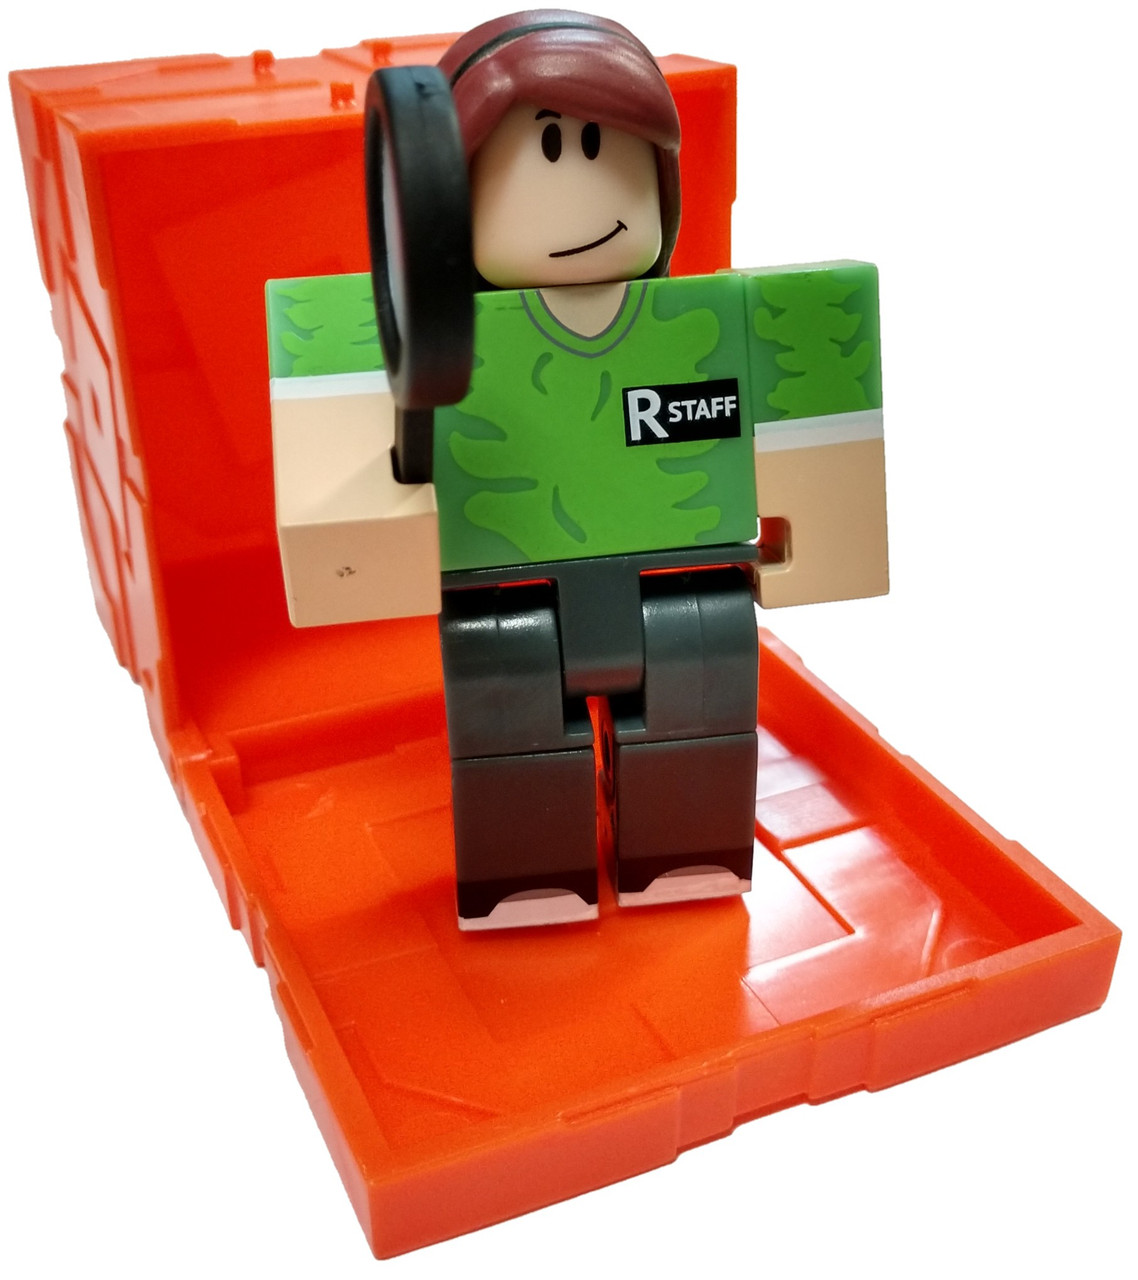 Roblox Series 6 Roblox History Museum Sales Staff 3 Mini Figure With Orange Cube And Online Code Loose Jazwares Toywiz - roblox bittersweet codes